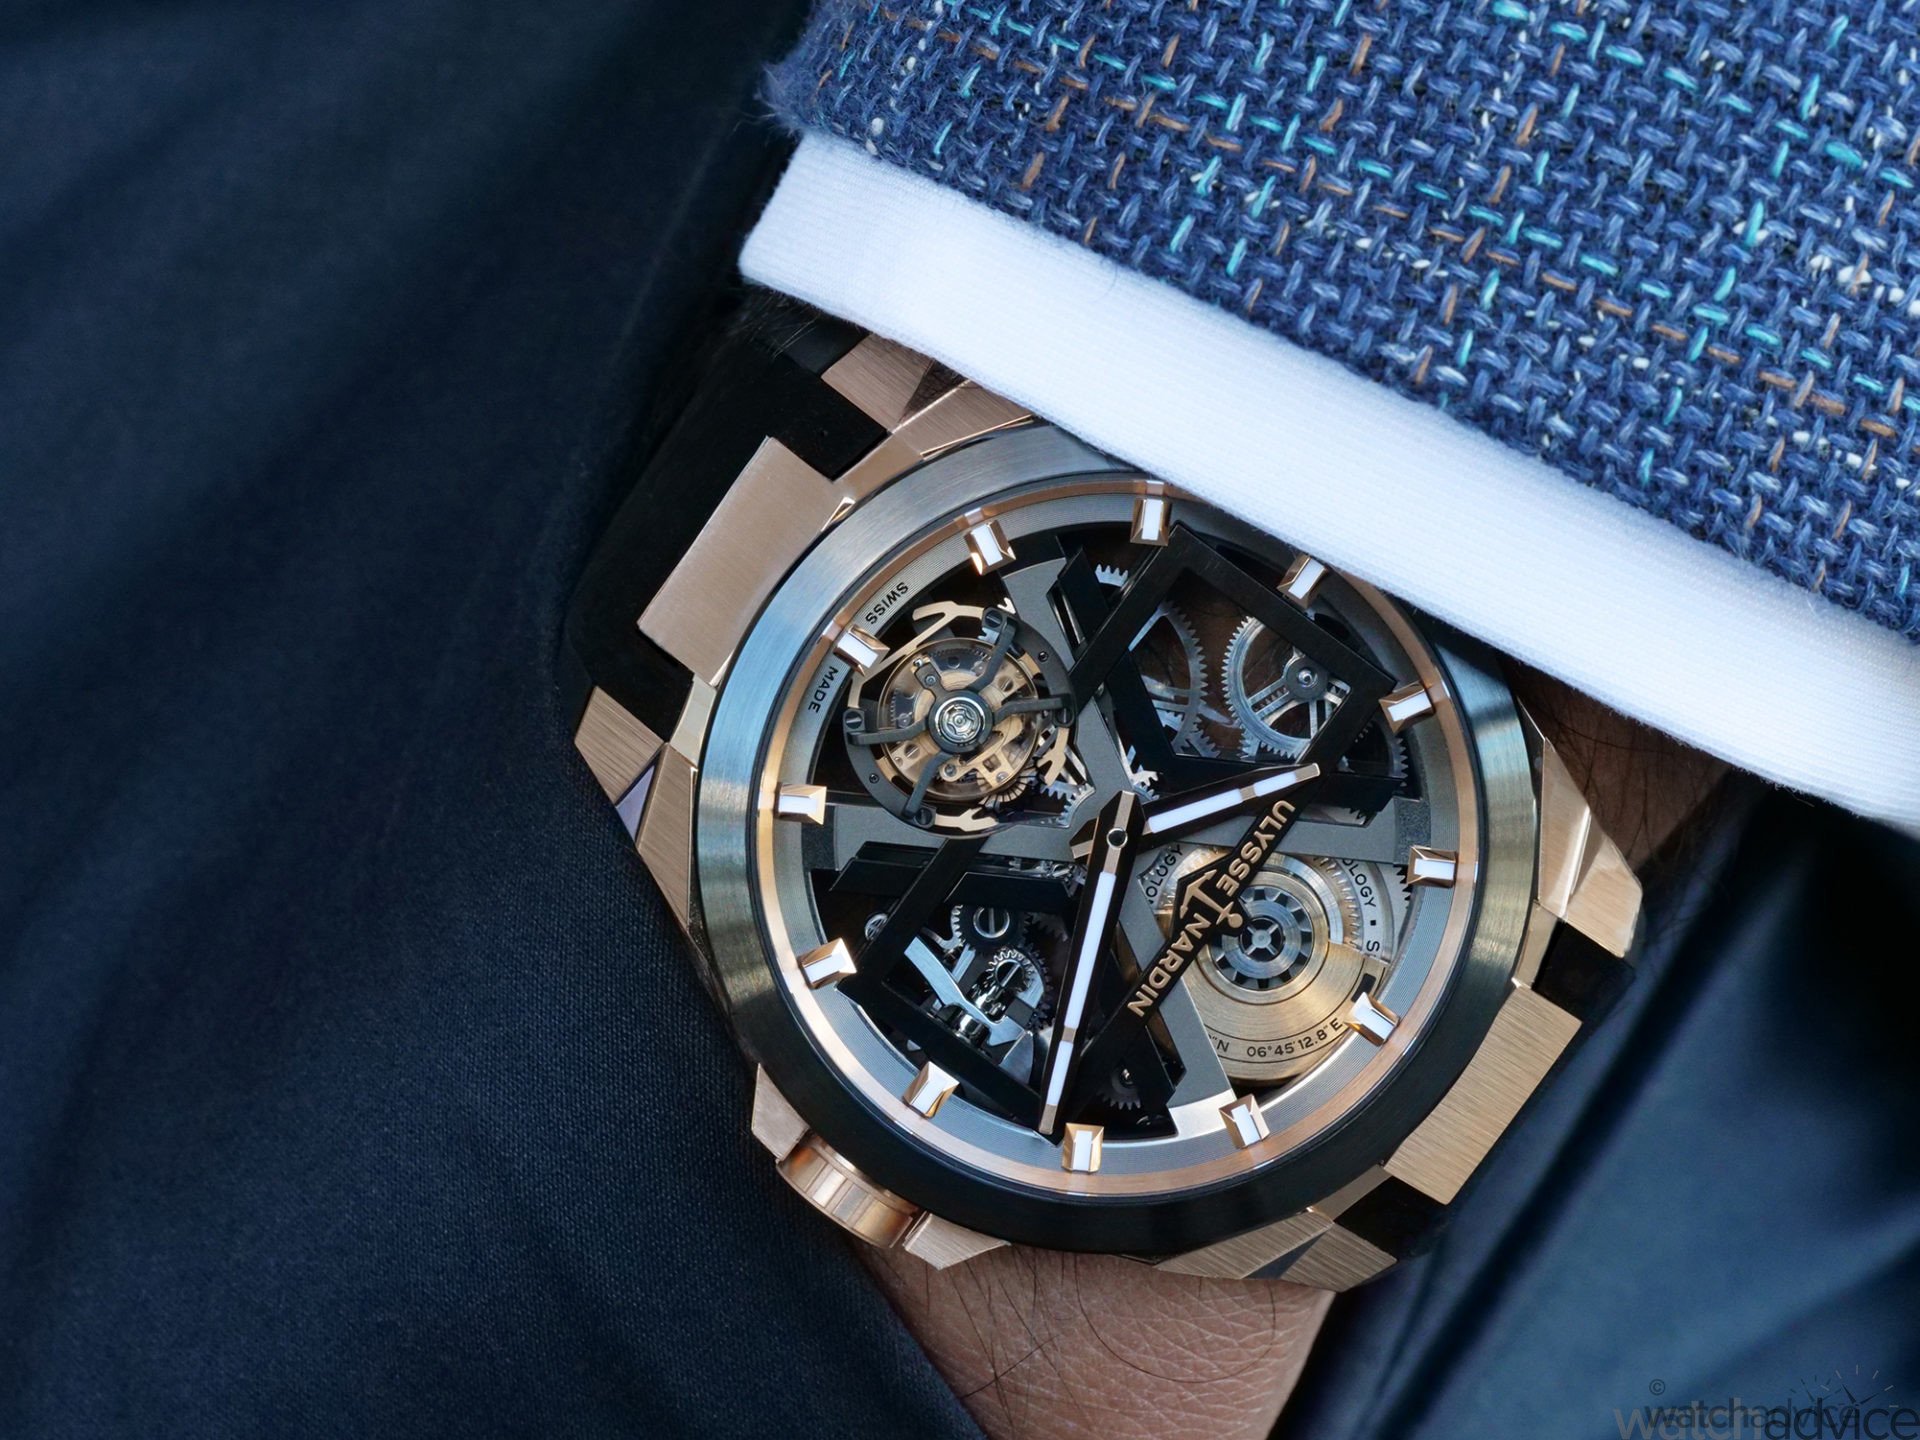 All New Ulysse Nardin Blast Hands-on Review – Watch Advice